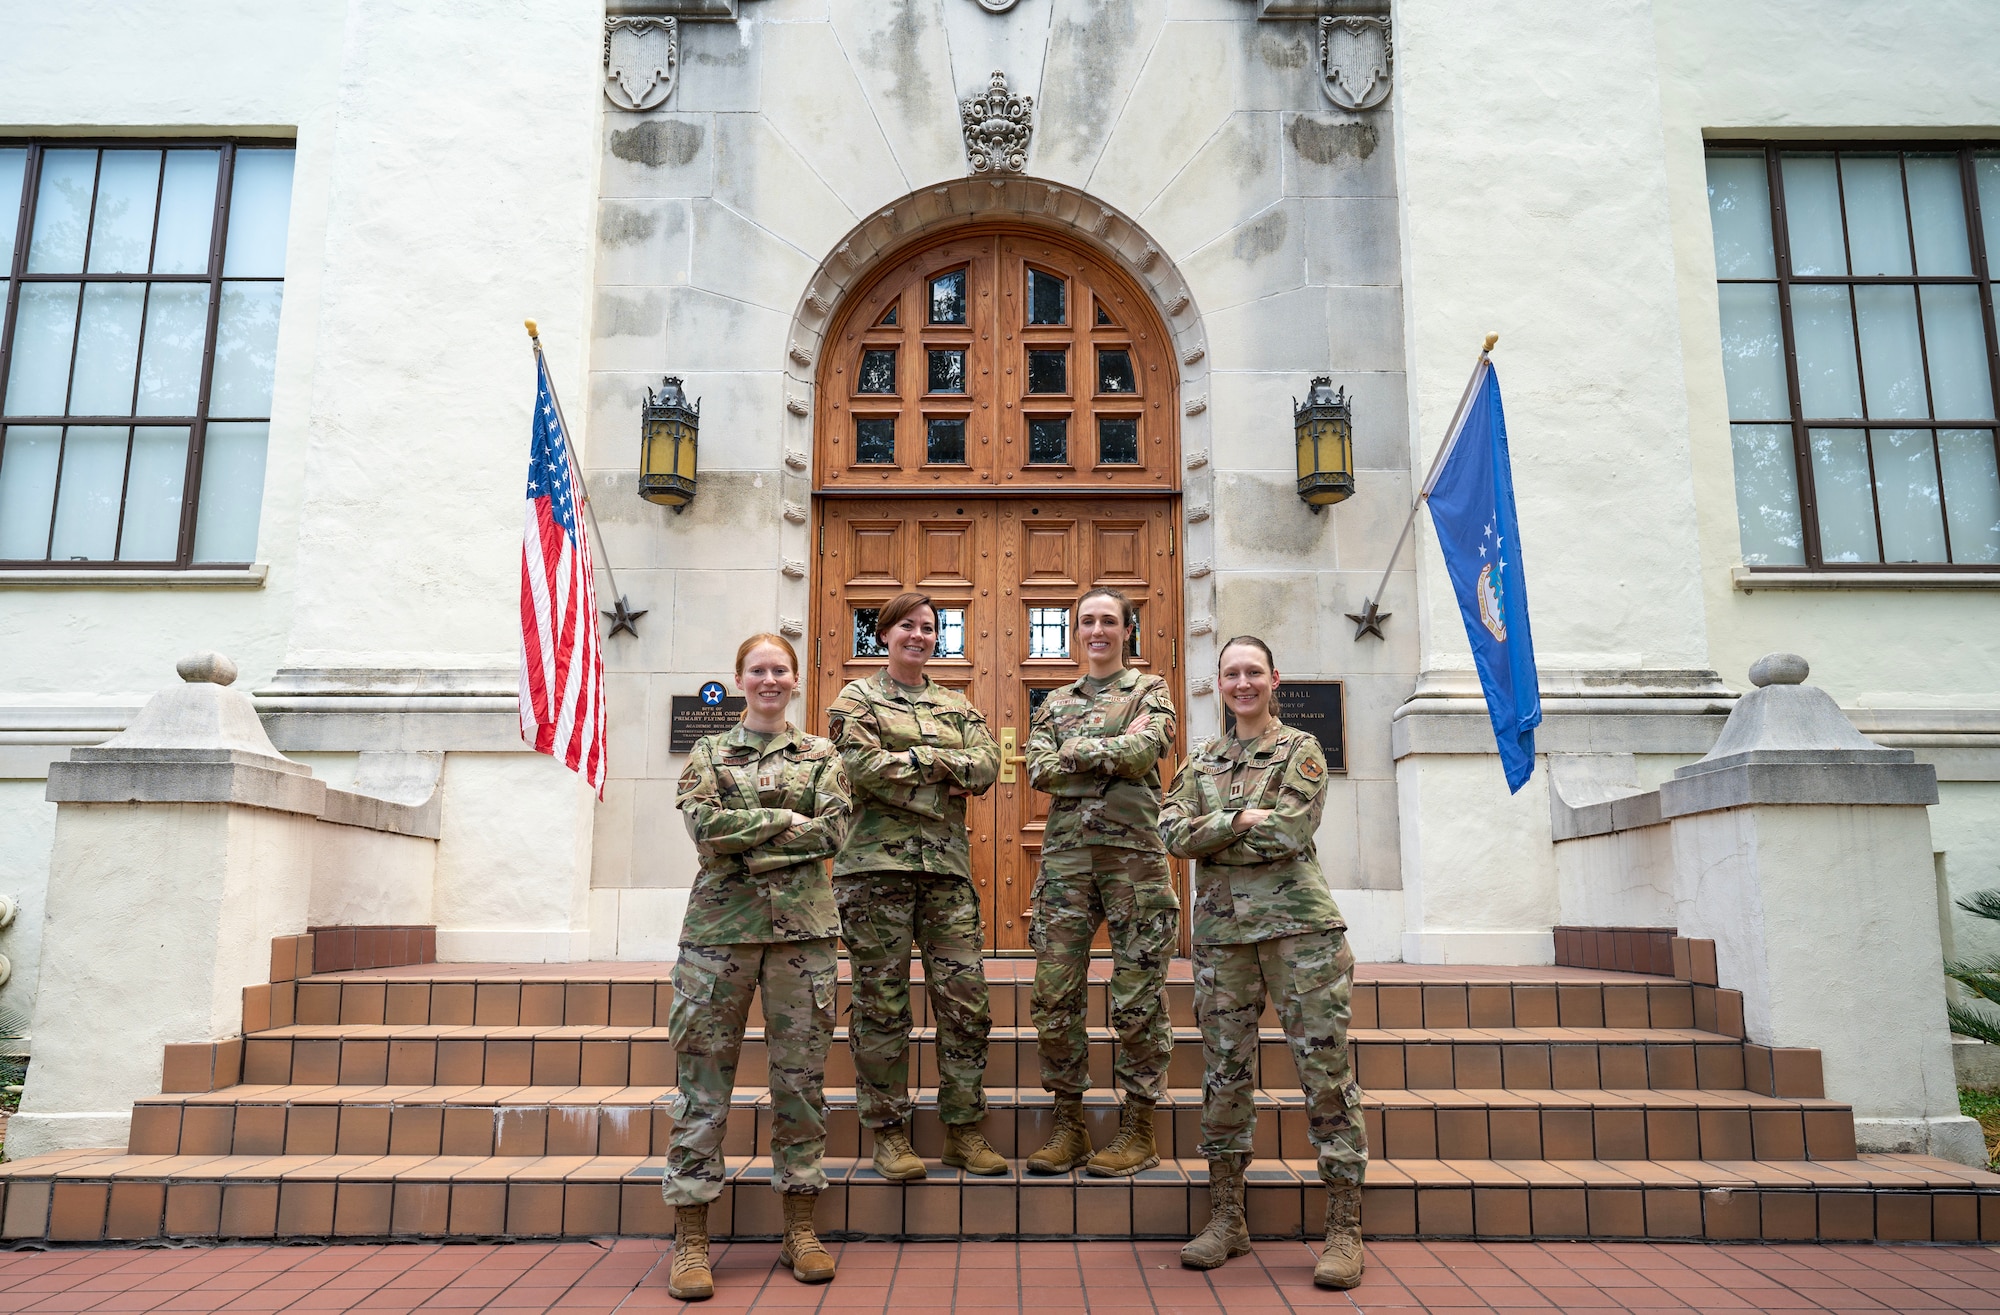 Four women in Air Force uniforms stand on the stairs in front of the building for the Air Education and Training Command at Kirtland Air Force Base, New Mexico.